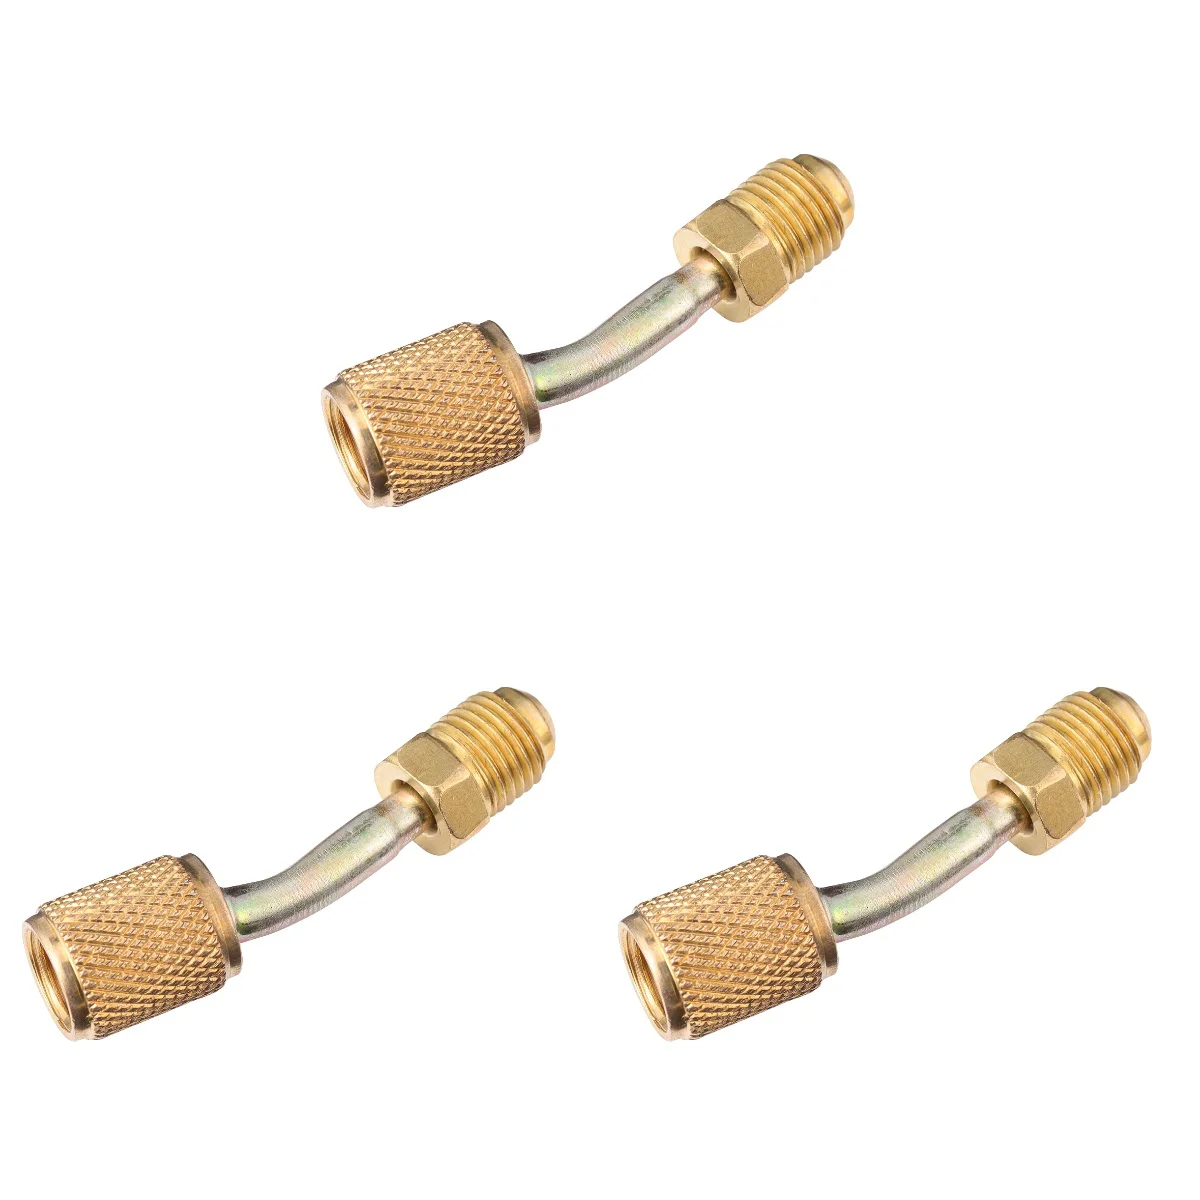 

3 Pc Fridge Accessories High-end Conditioning Manifold Converting Car Quick Coupler Connector Adapter Air Conditioner